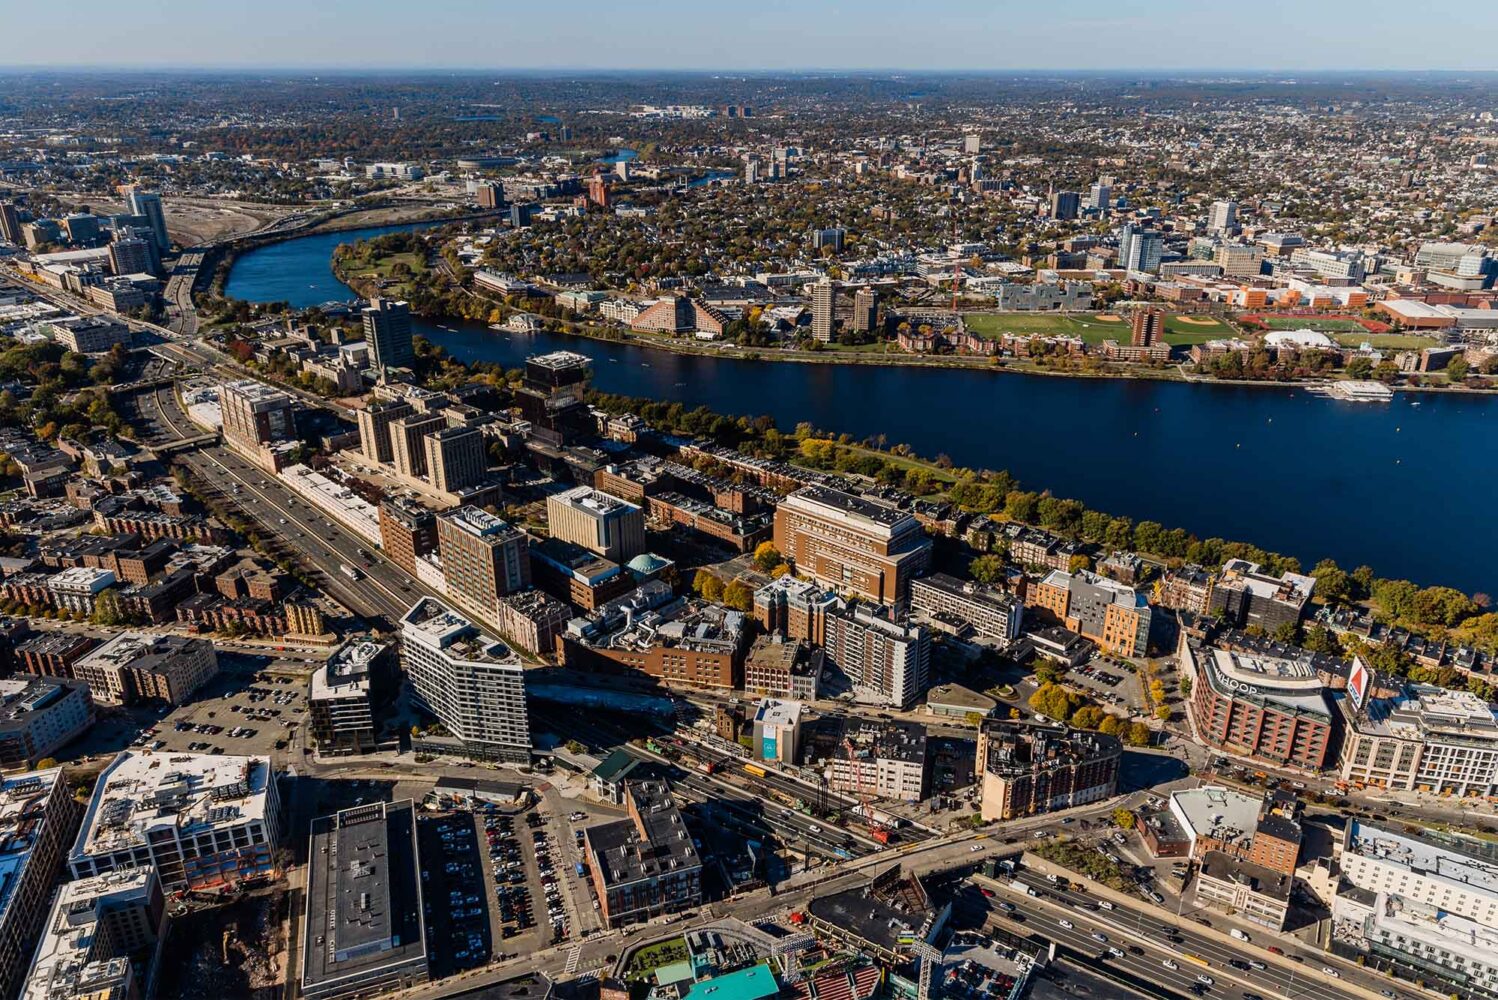 Photo: An aerial view of Boston University's campus, including the Charles River